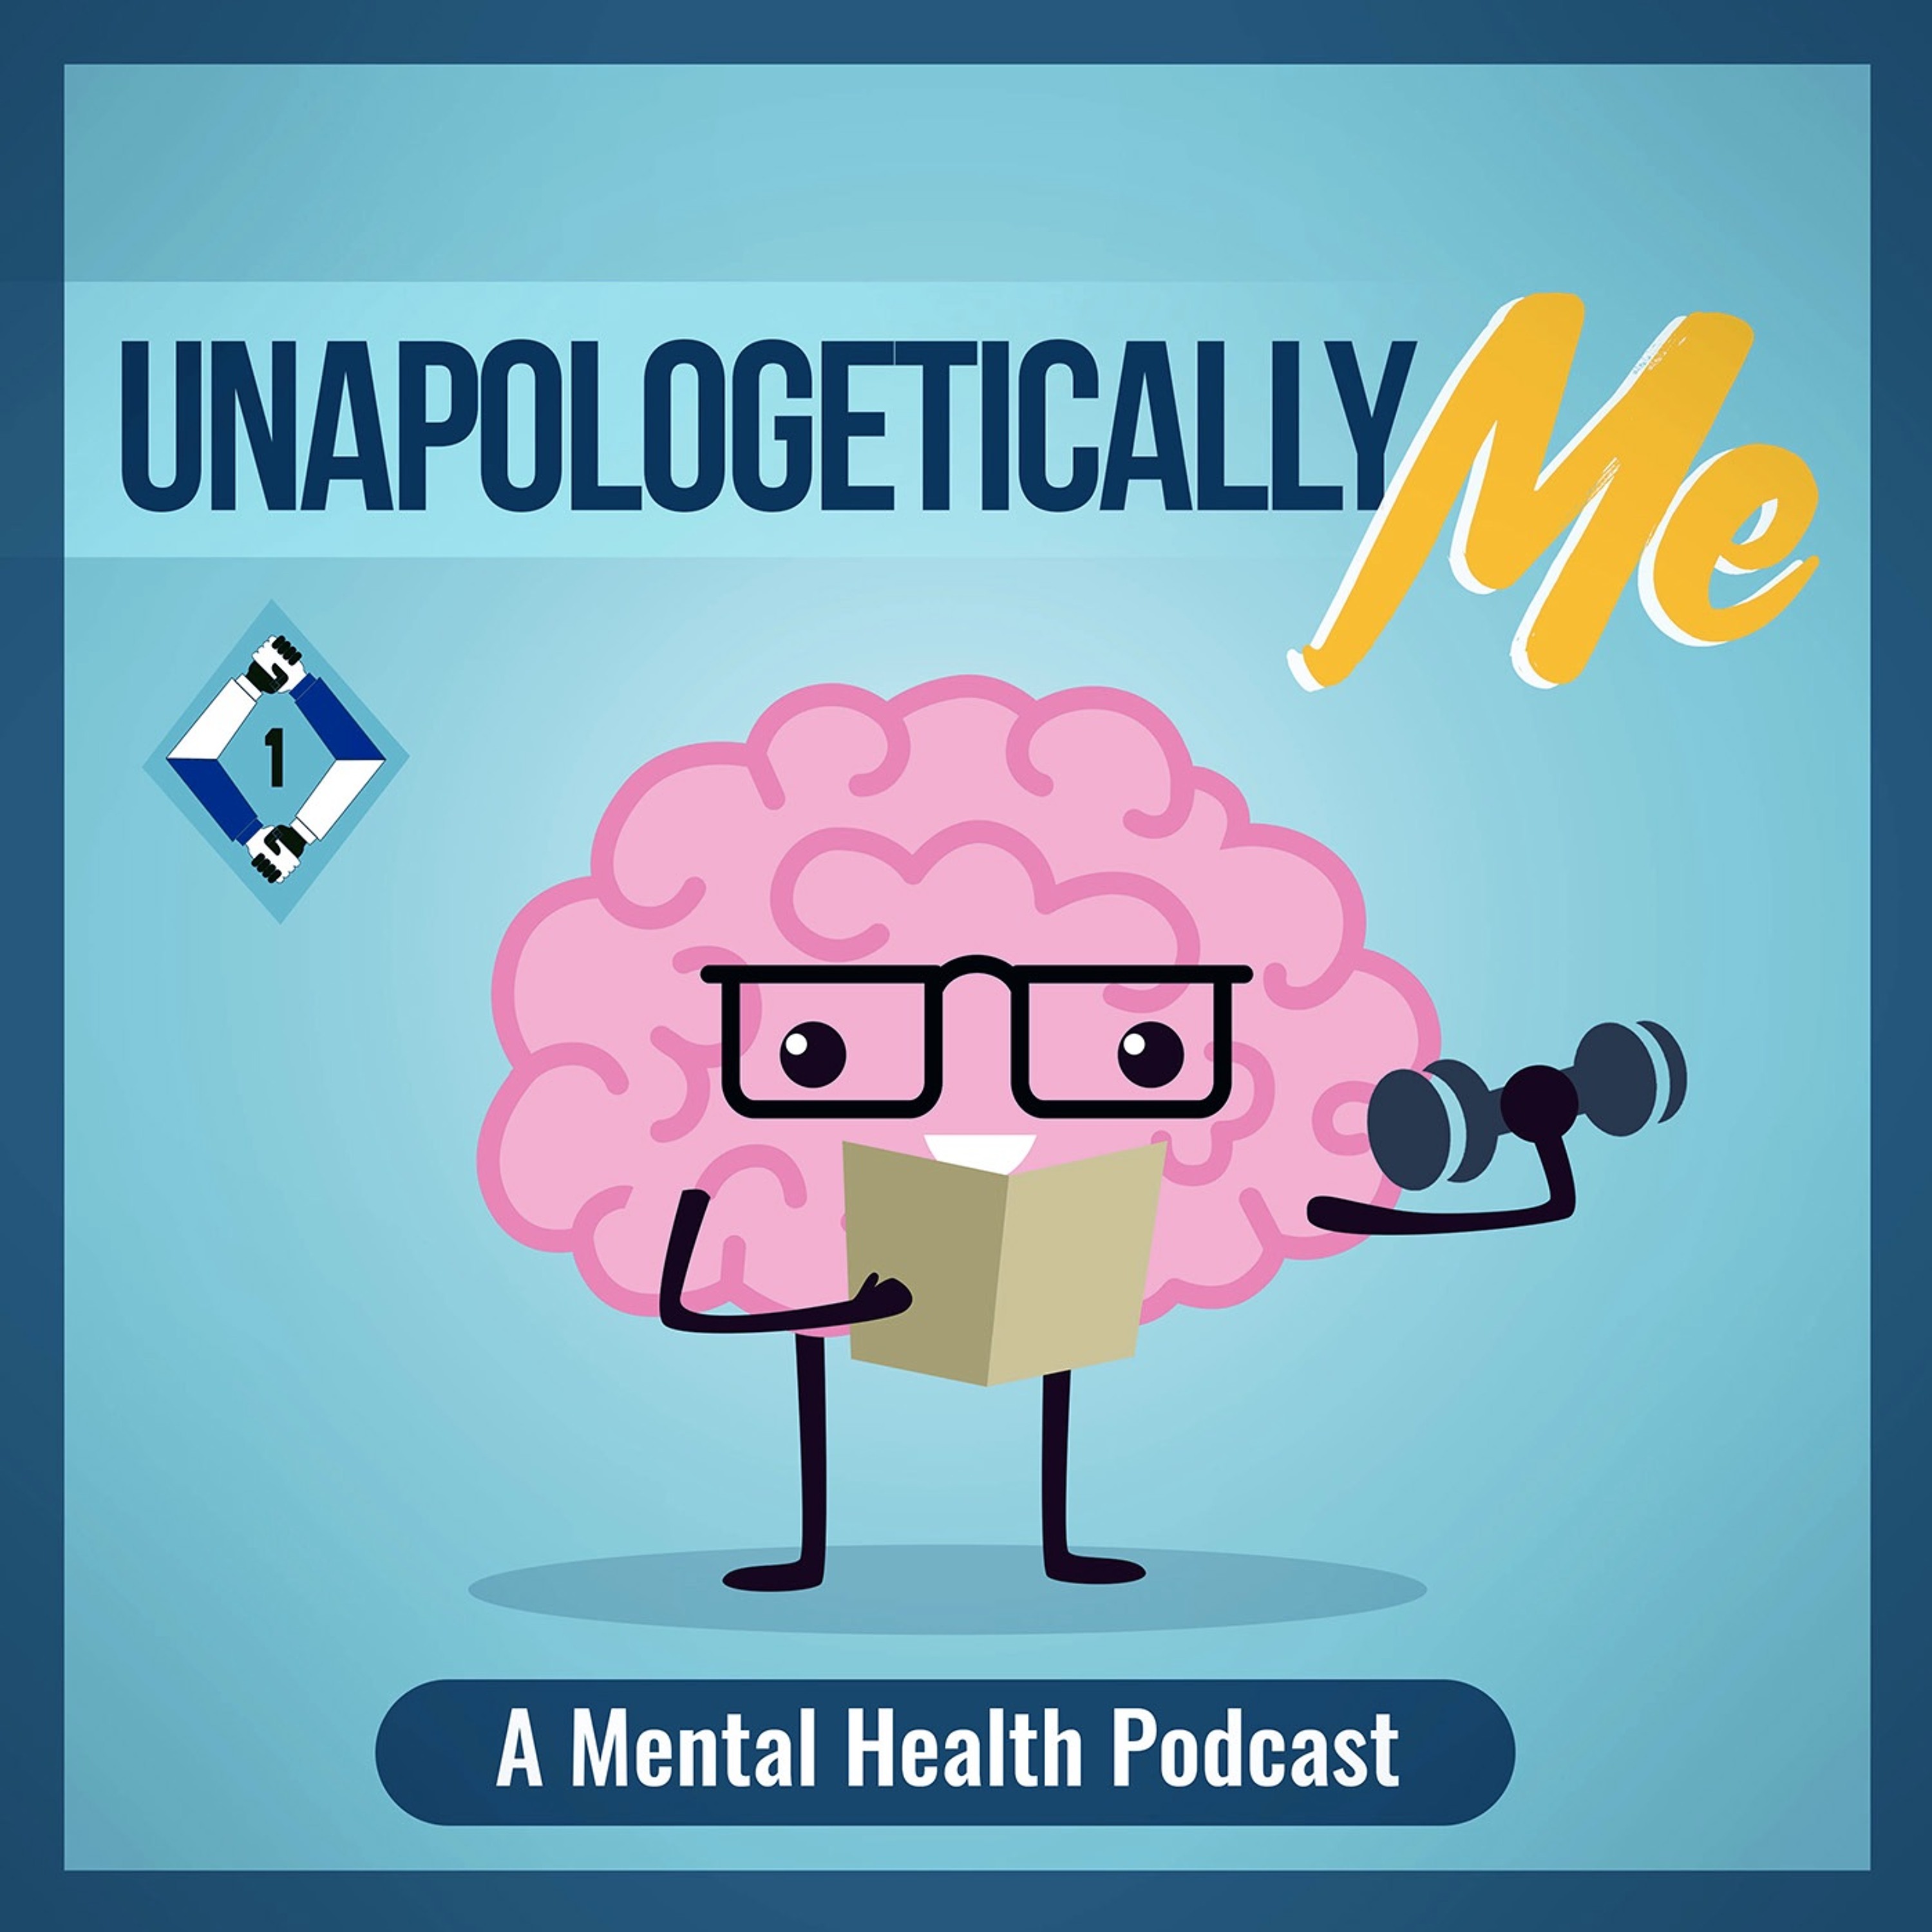 Unapologetically Me: A Mental Health Podcast - Why You Need Physical Therpay